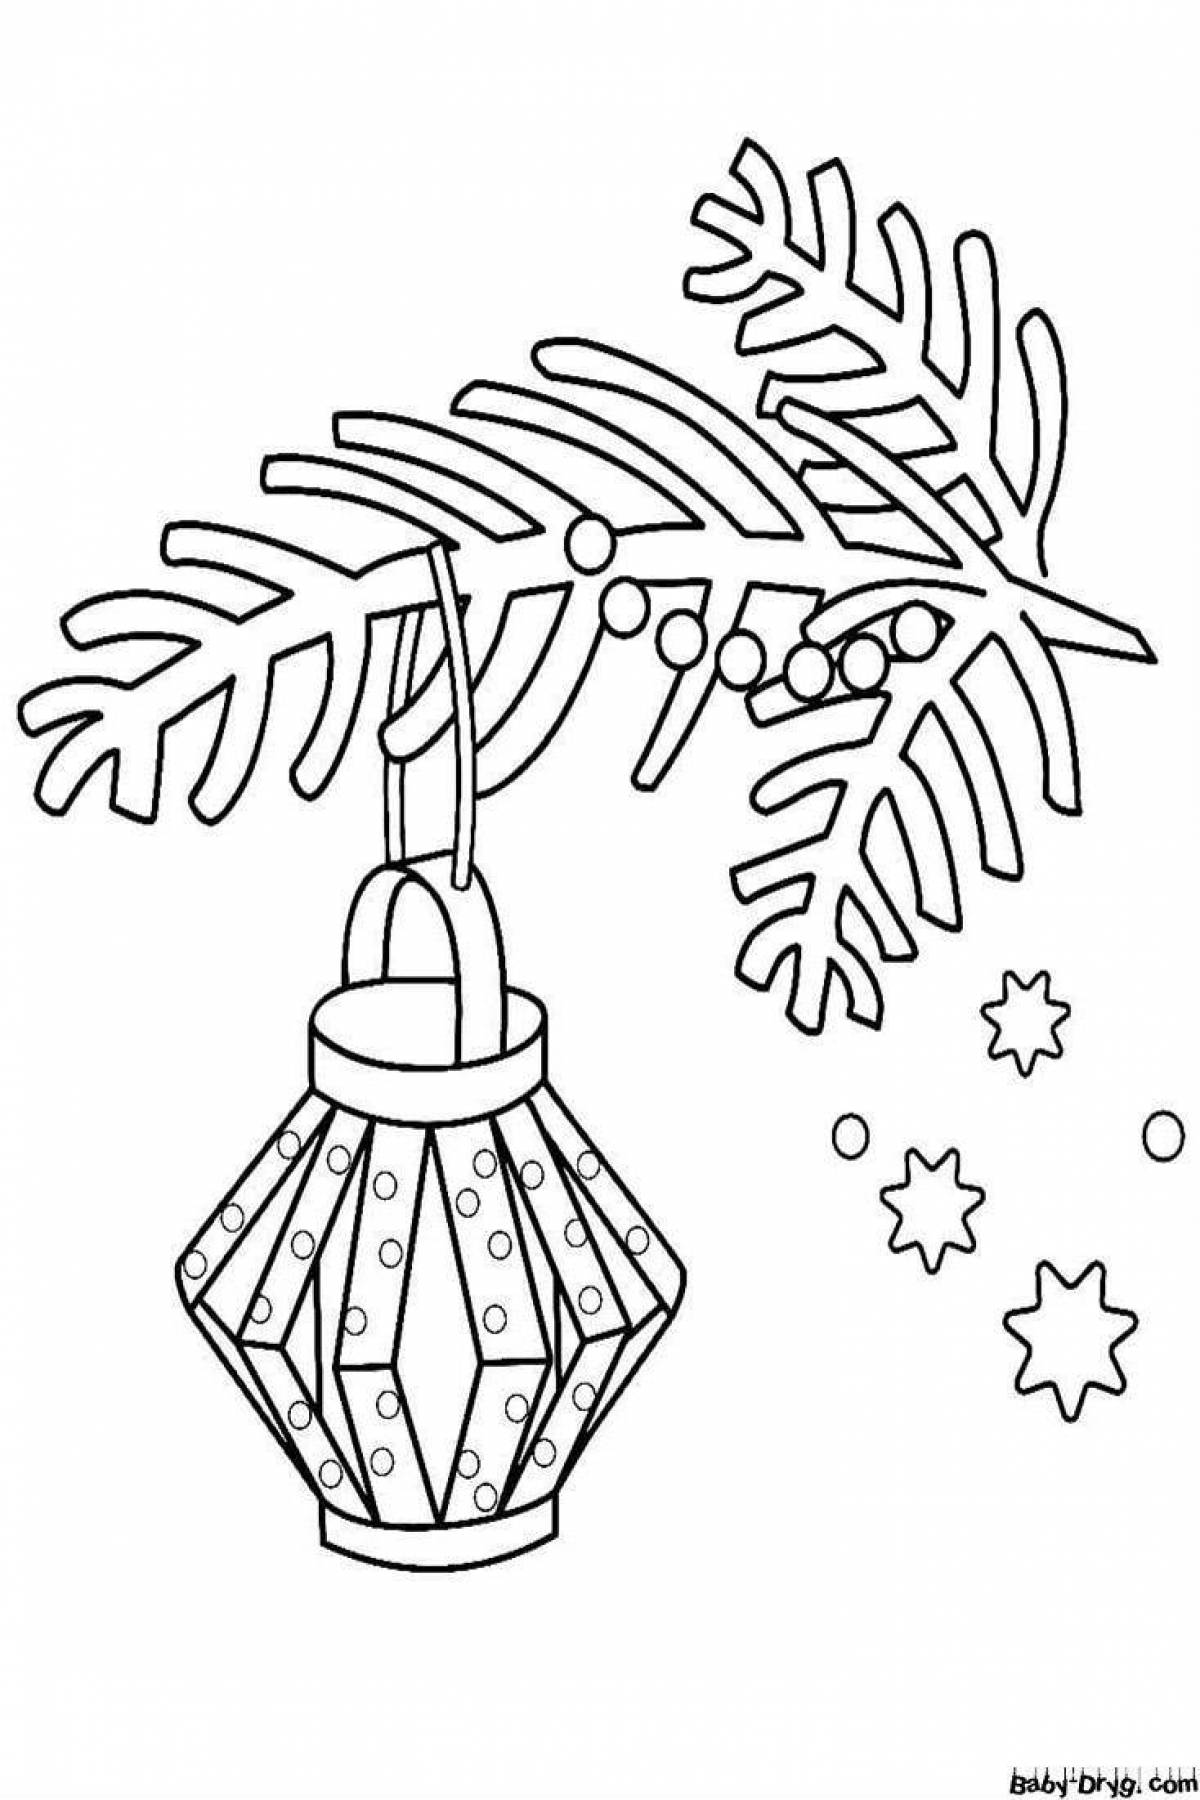 Coloring page playful spruce branch